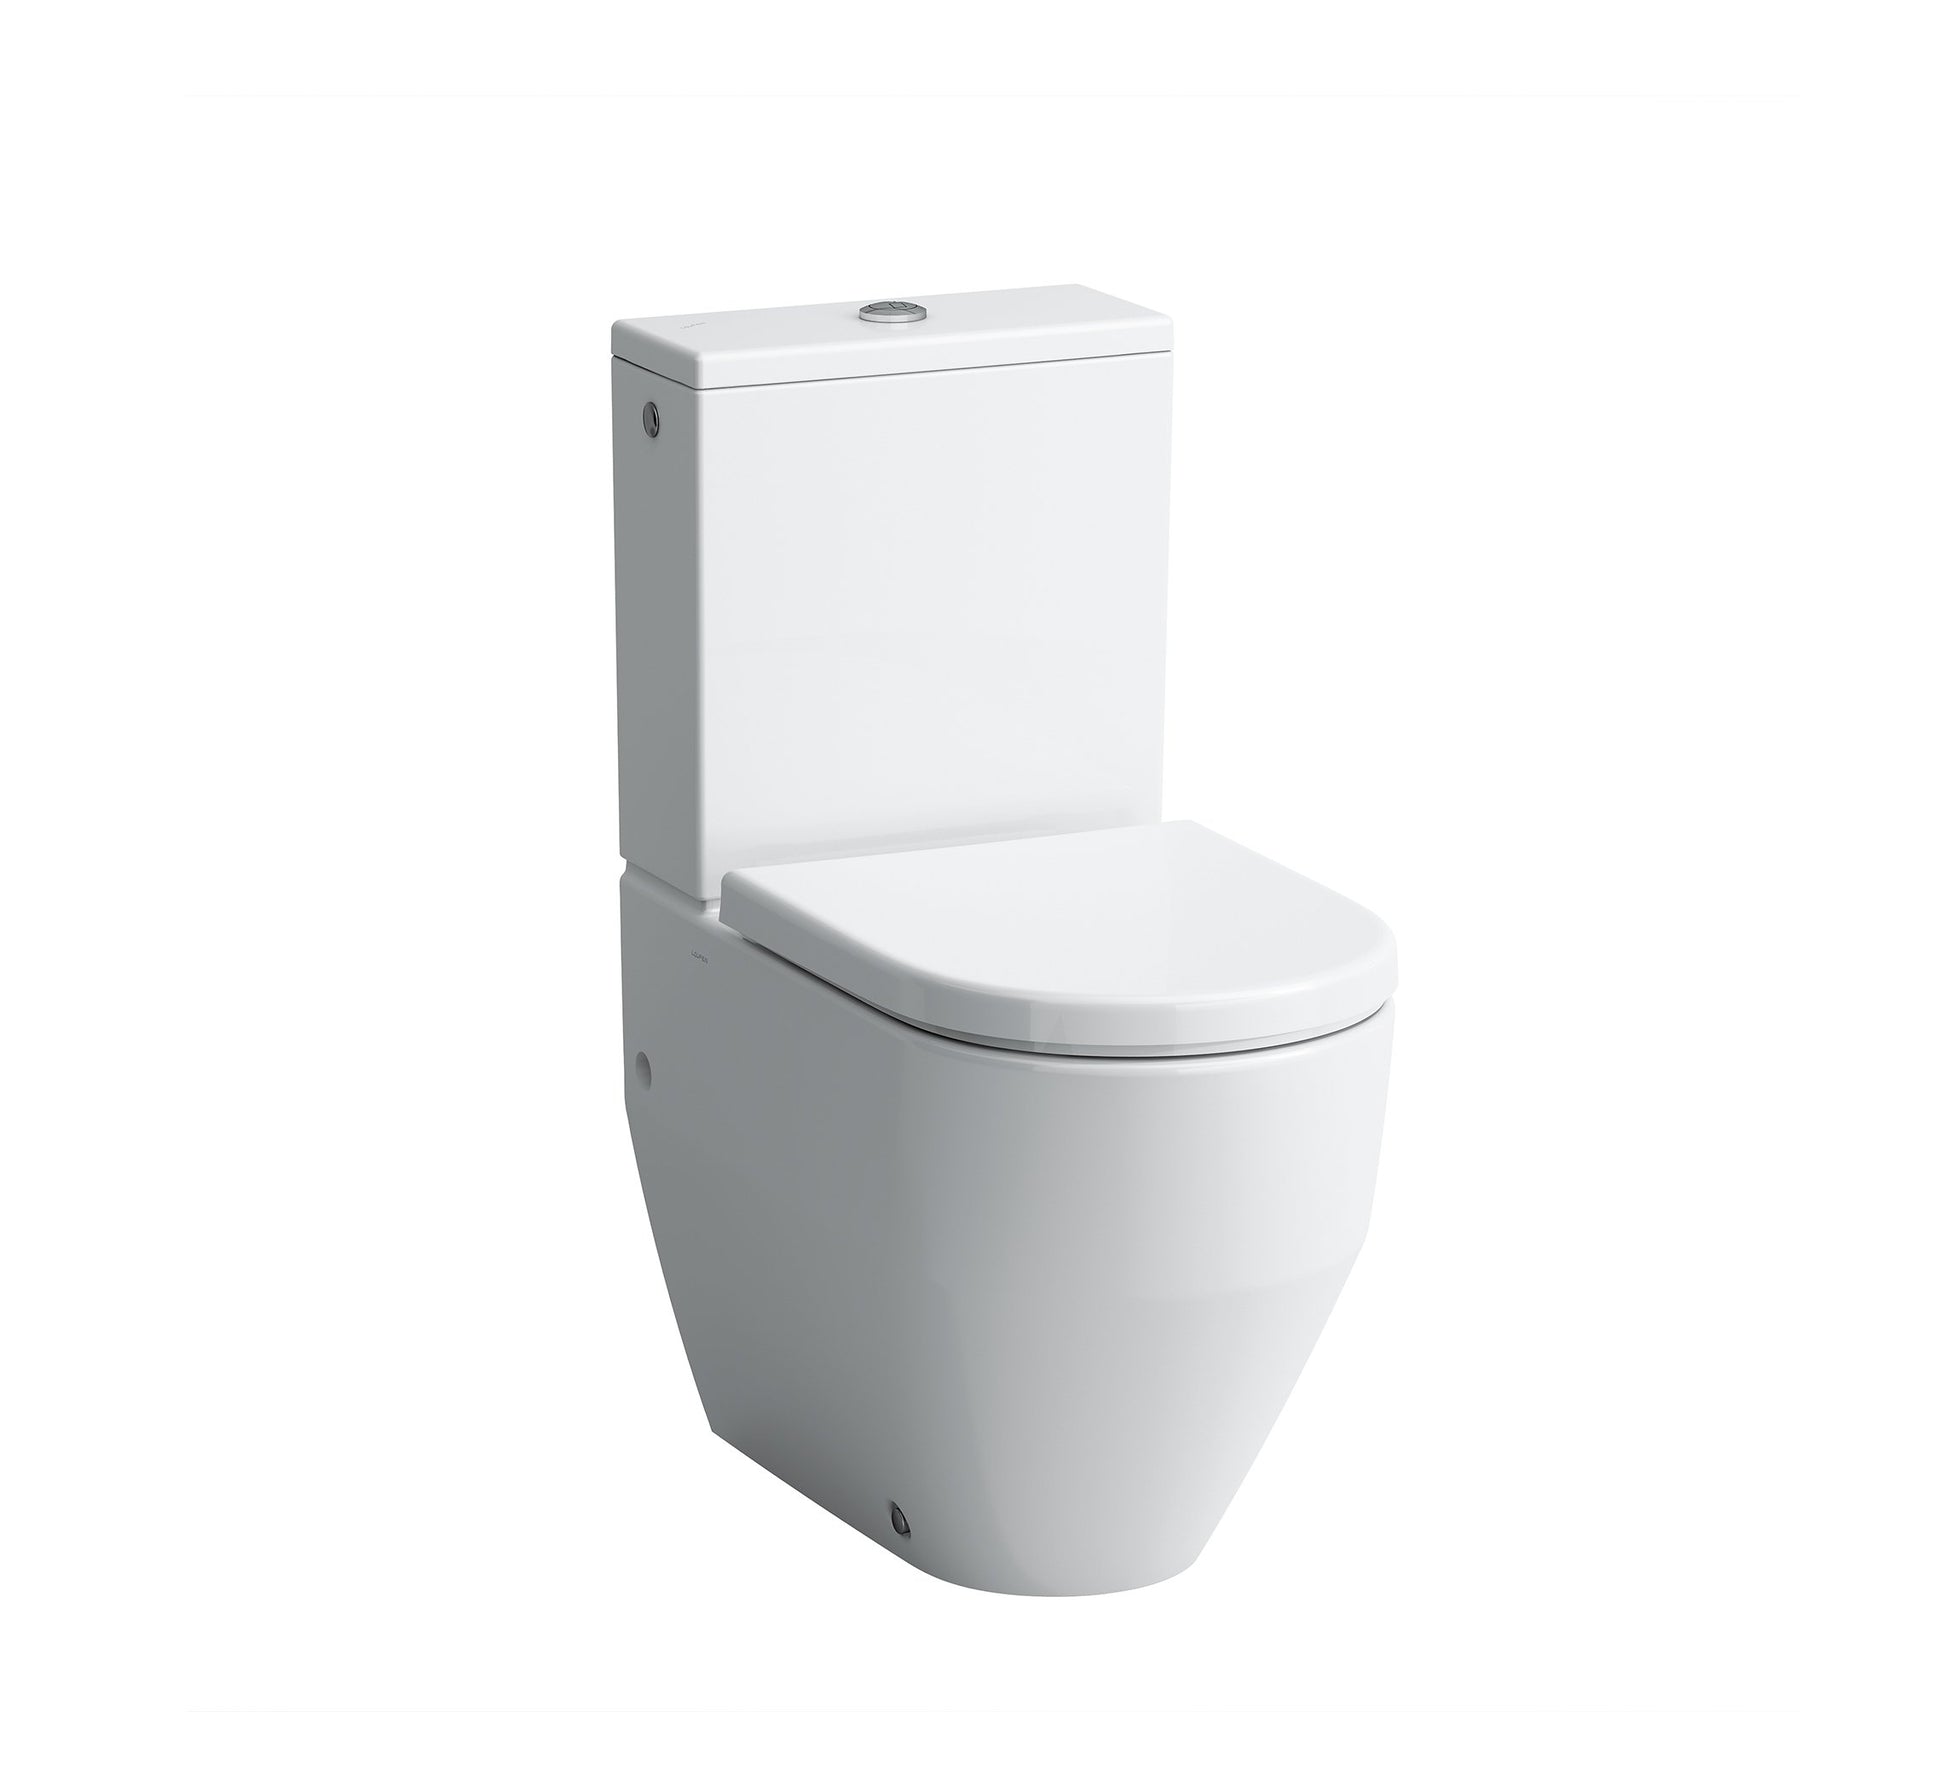 LAUFEN PRO A FLOORSTANDING WC COMBINATION WASHDOWN, BACK-TO-WALL HORIZONTAL OR VERTICAL OUTLET FOR BOTTOM WATER INLET CISTERN WHITE - 8.2595.2.000.231.1 - Tadmur Trading